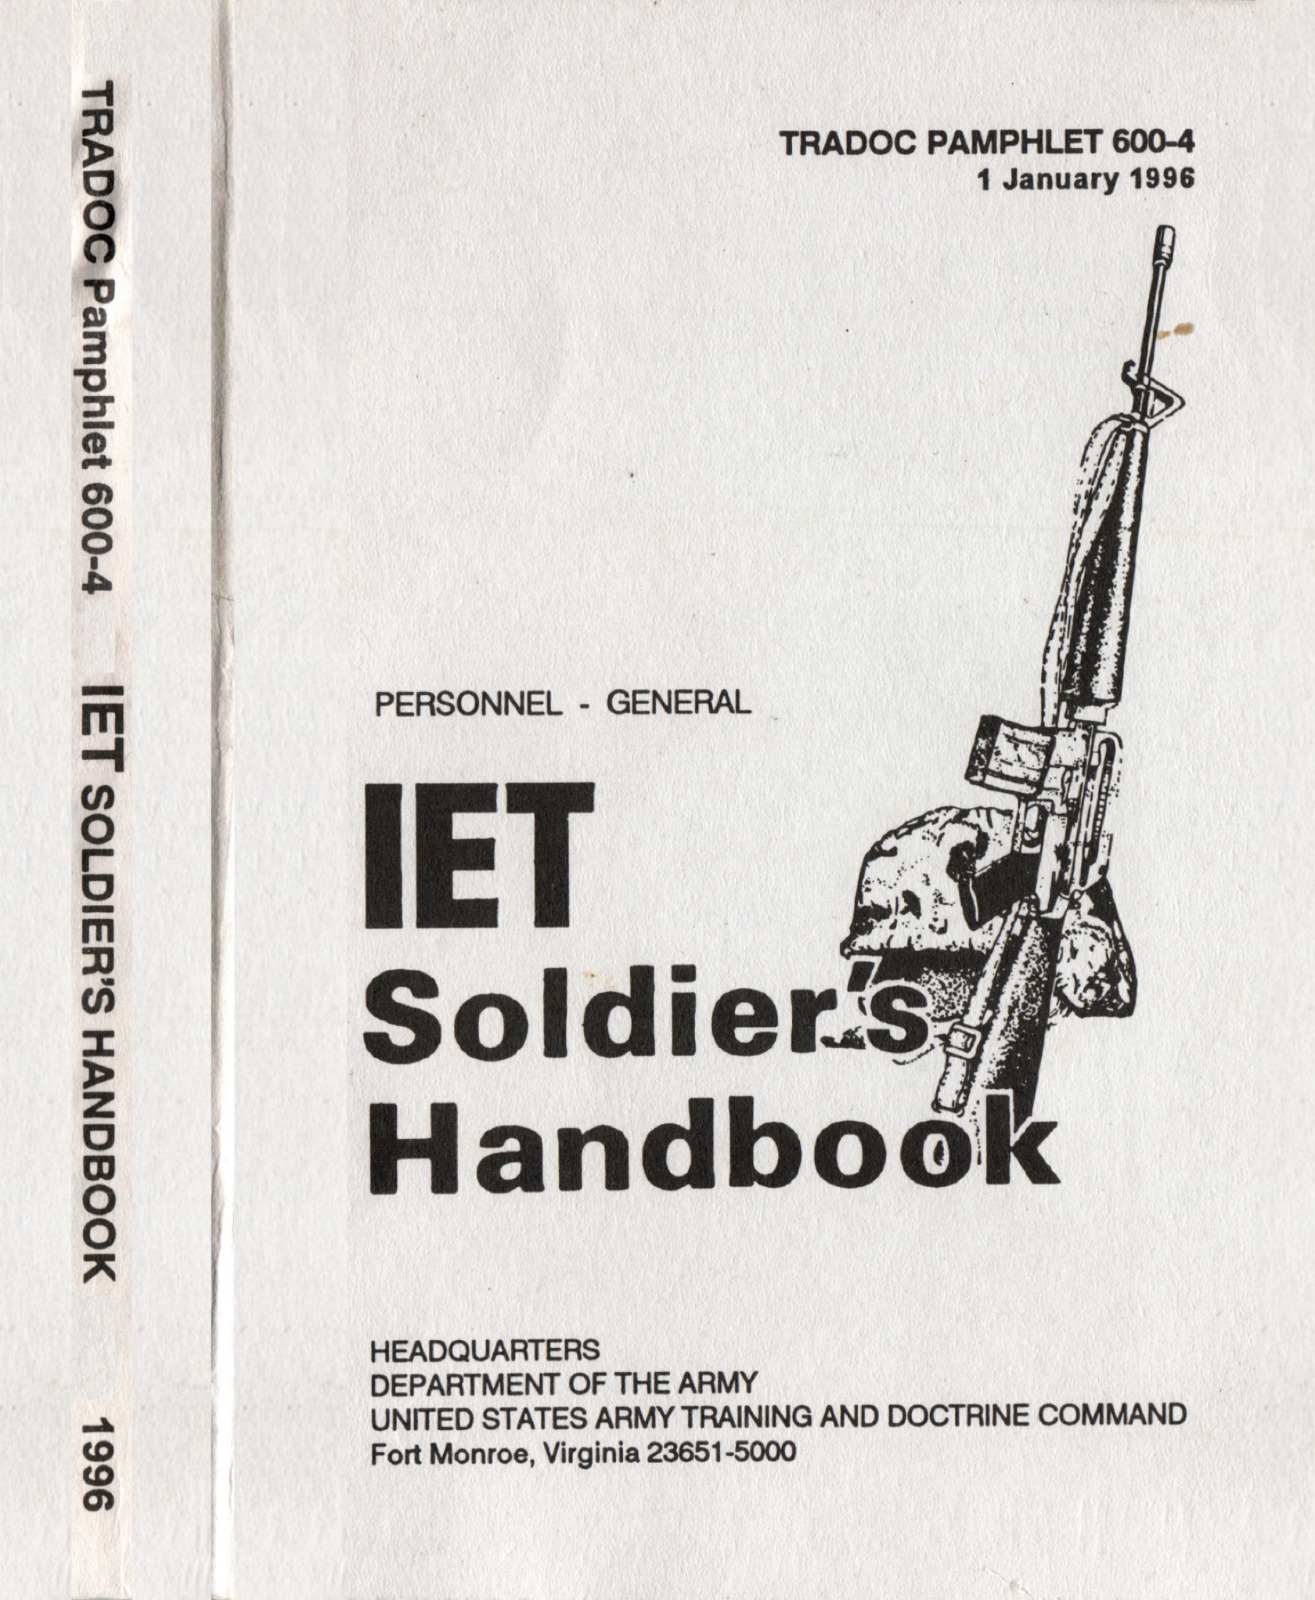 435 Page 1996 IET BASIC TRAINING SOLDIER'S MANUAL ARMY TESTING SMART on Data CD